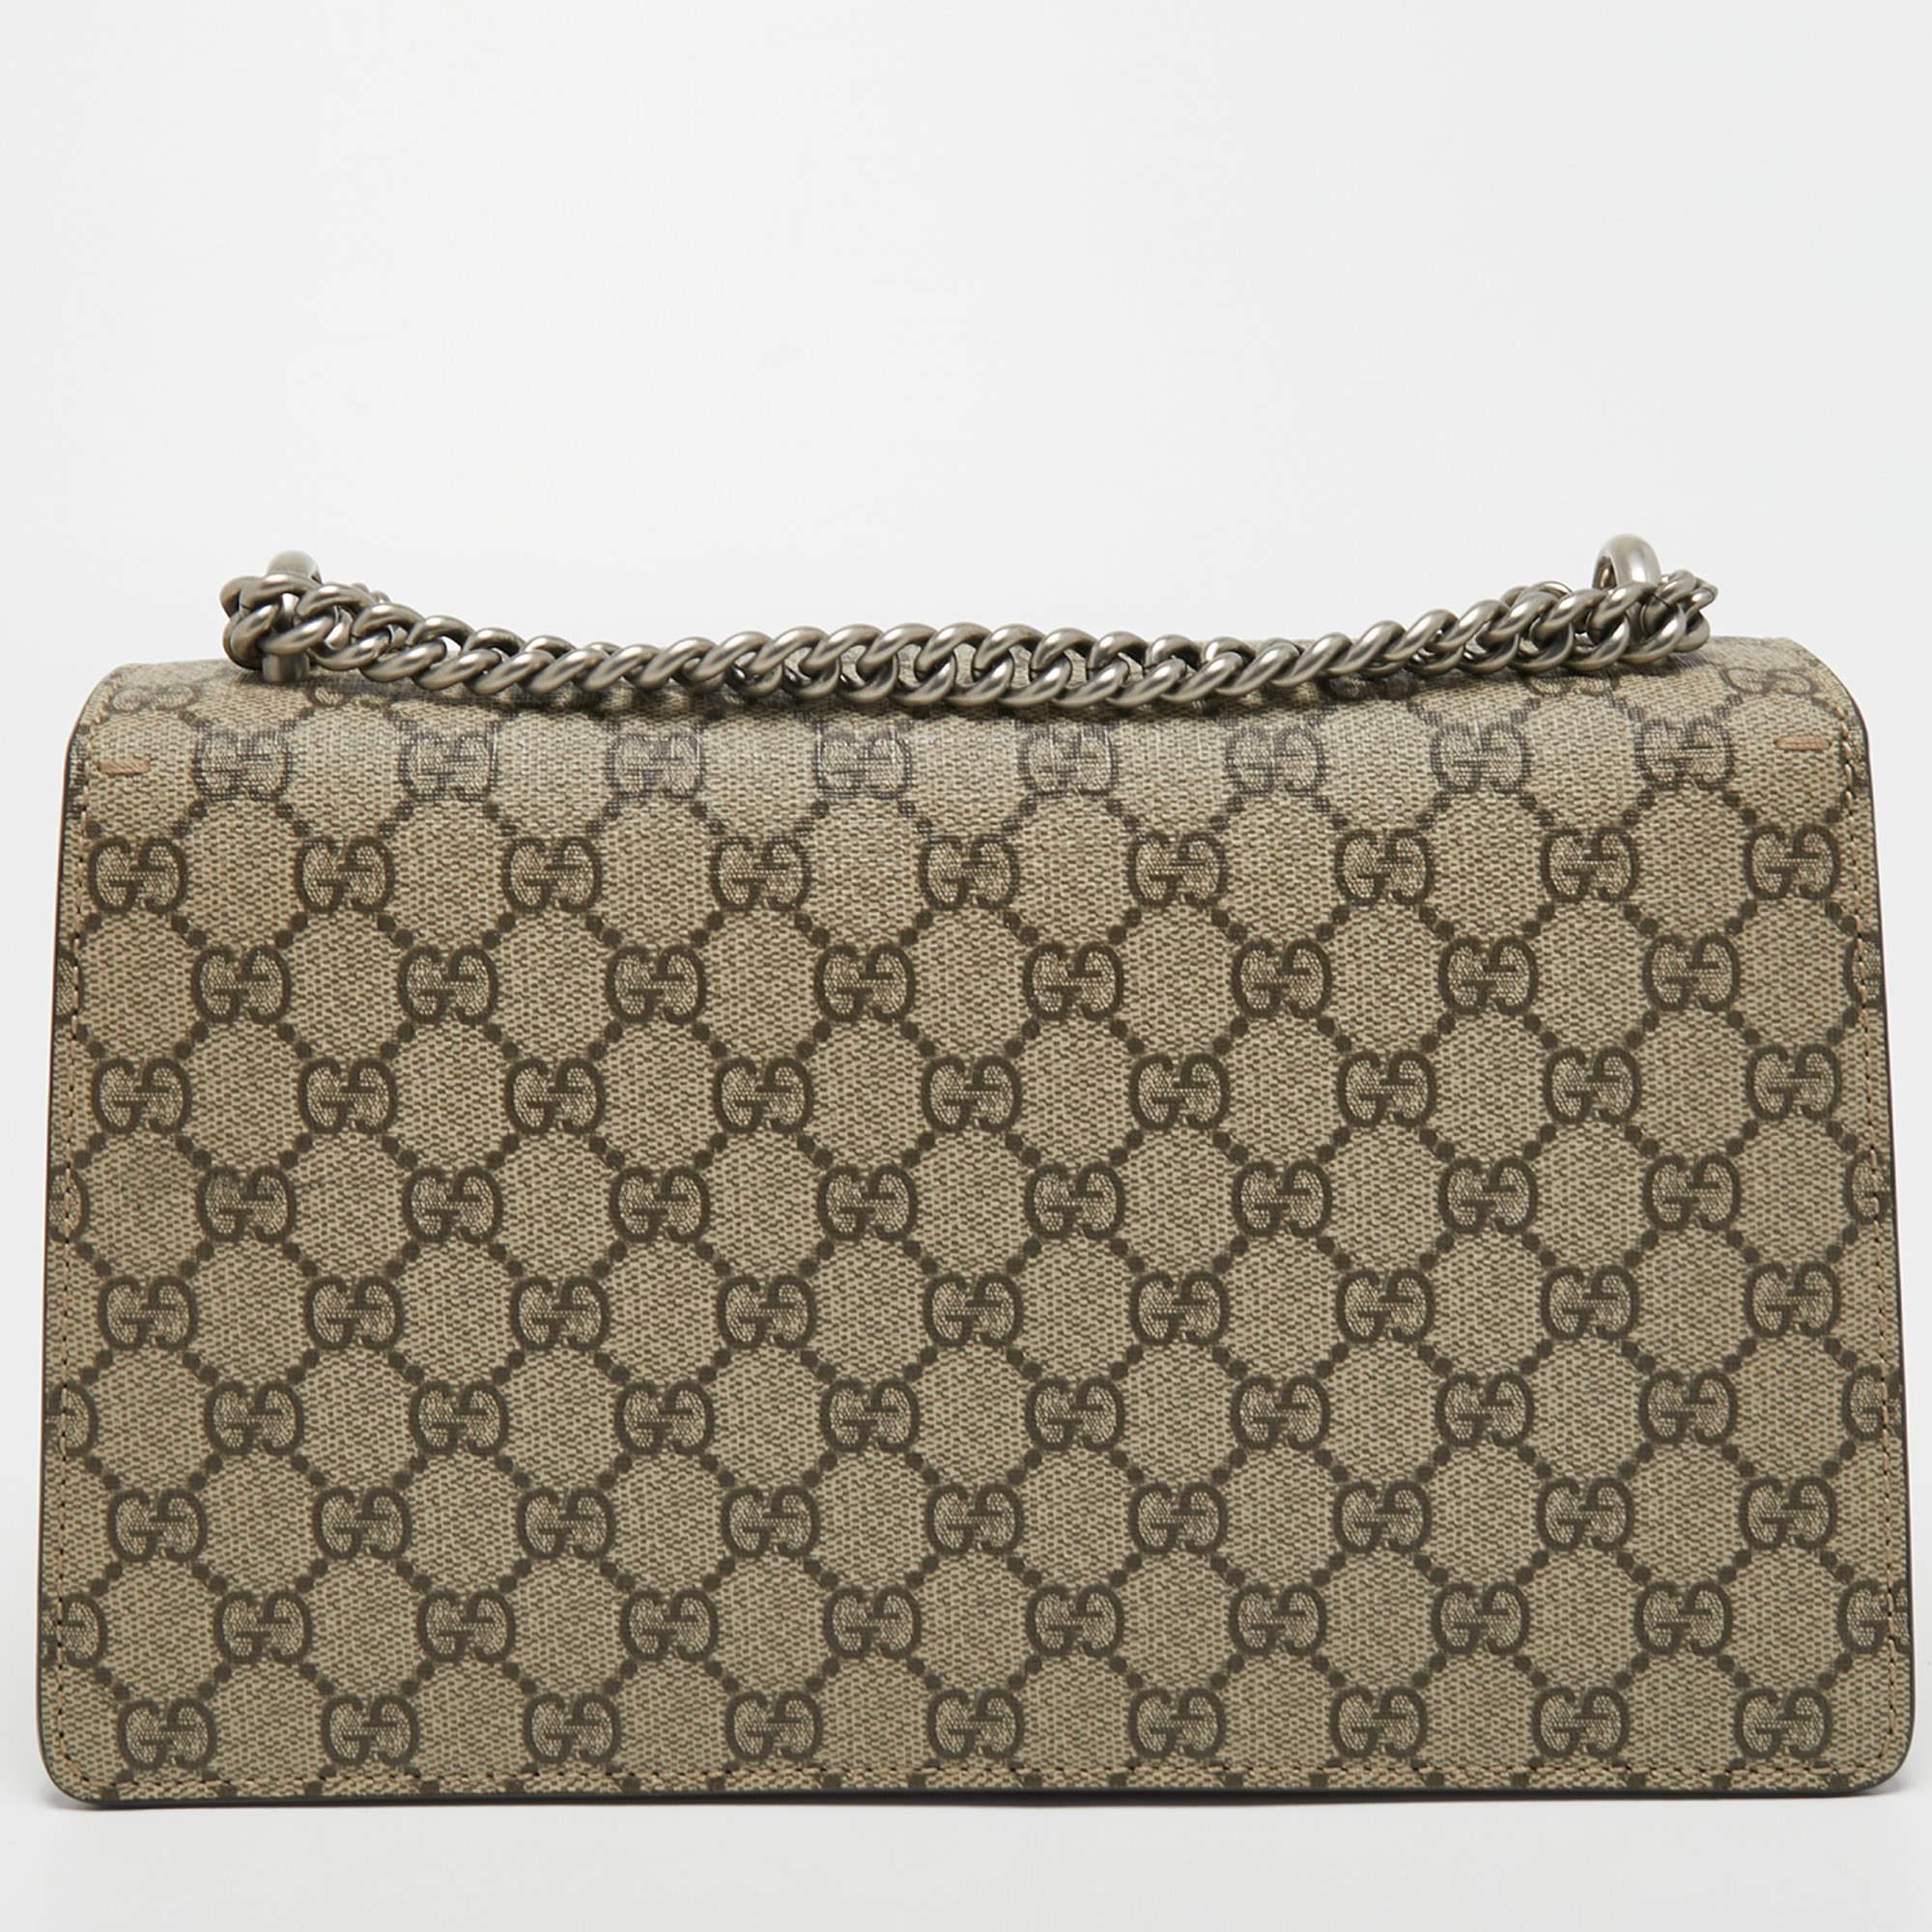 Gucci's Dionysus collection is inspired by the Greek God Dionysus, who is believed to have crossed the Tigris river on a tiger sent to him by Zeus. This creation has been beautifully made from GG Supreme canvas and suede and beautifully merges the